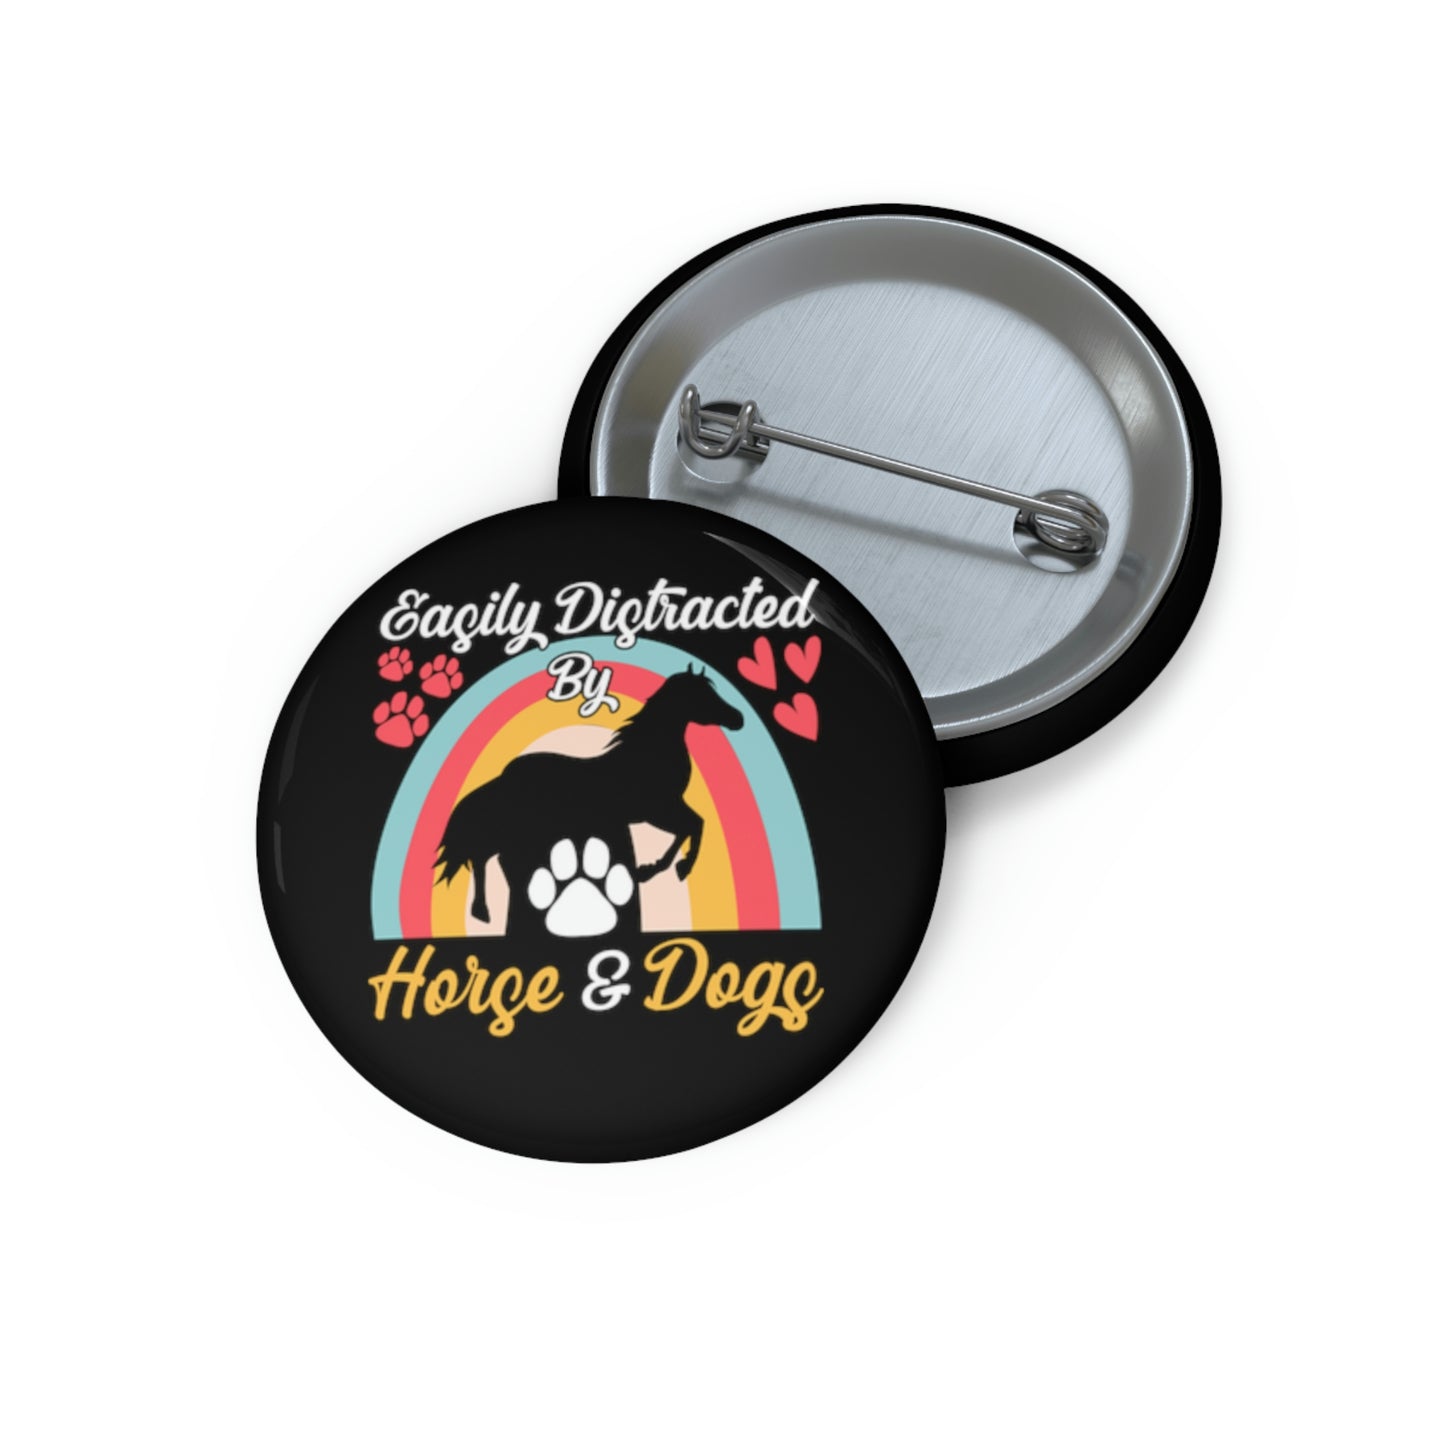 Easily Distracted by Horse & Dogs Pin Buttons